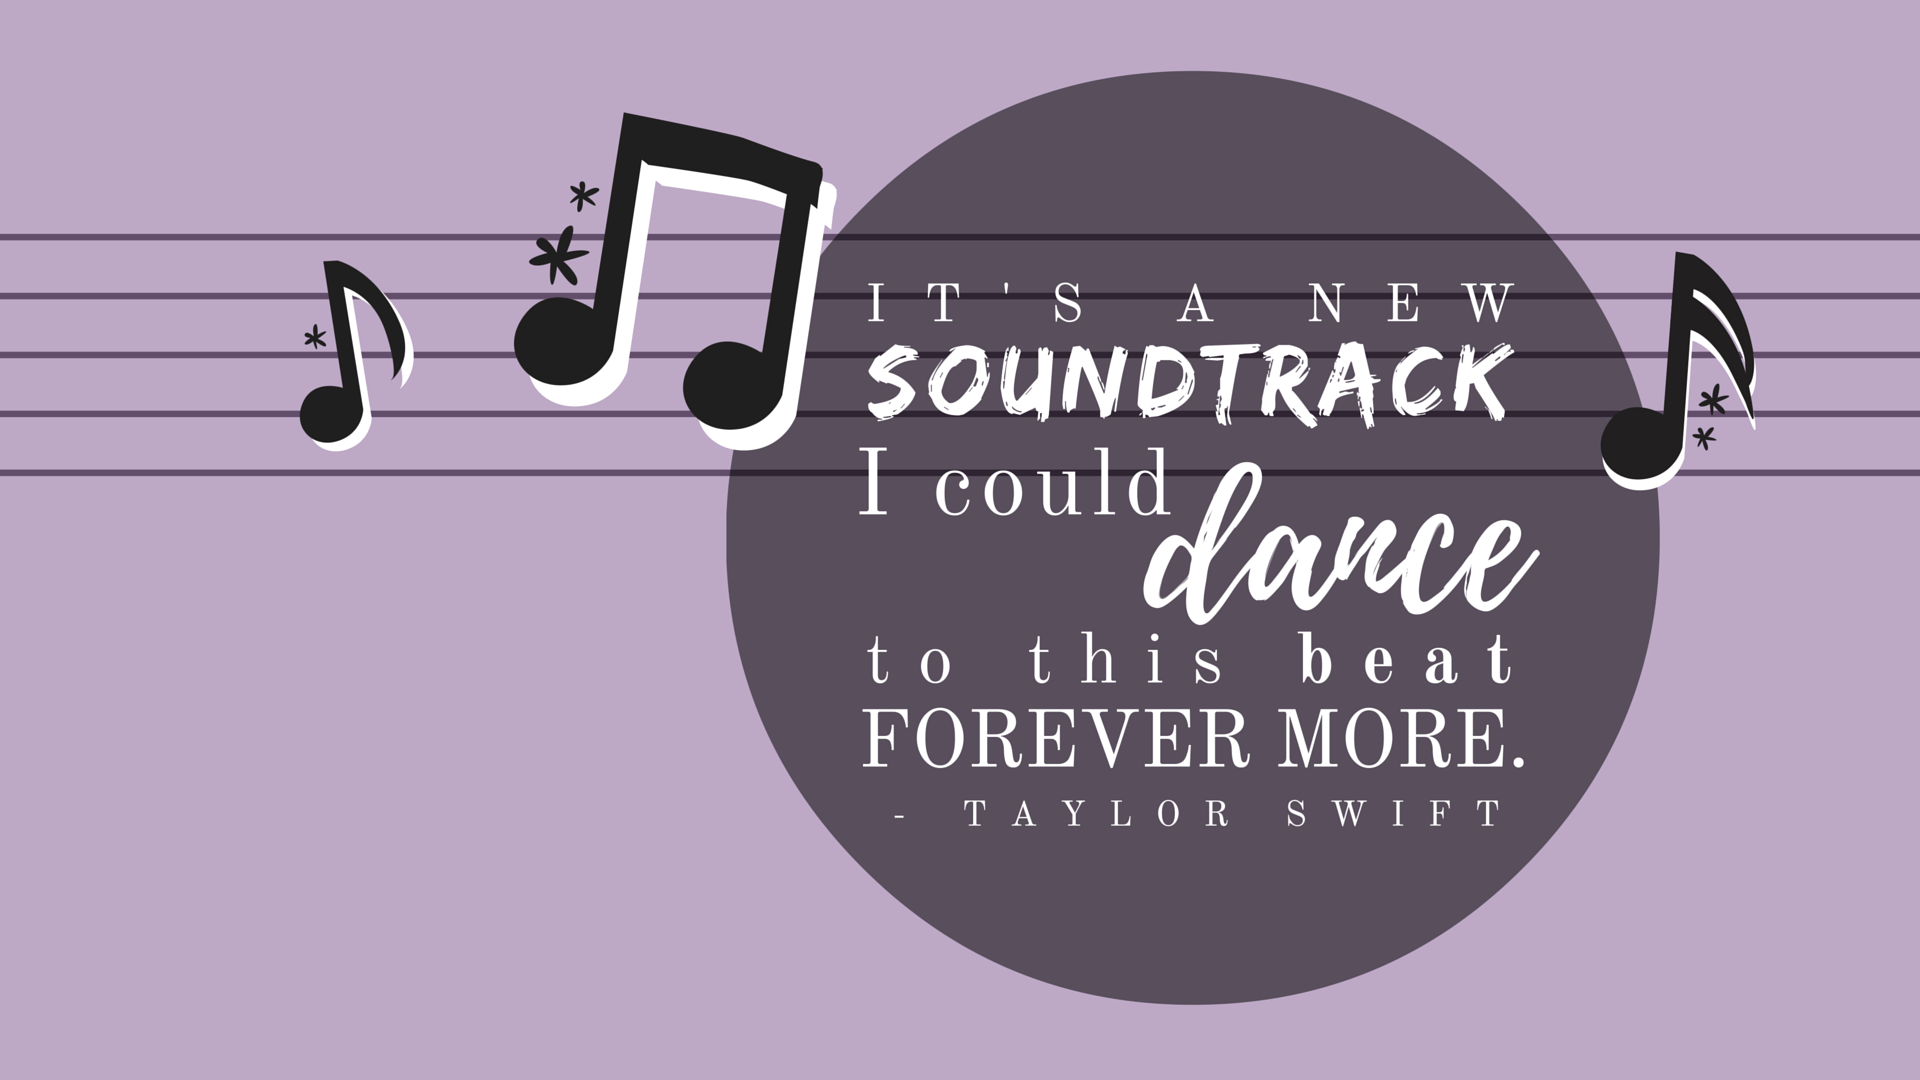 It's a new soundtrack i could dance to beat this forever - Taylor Swift